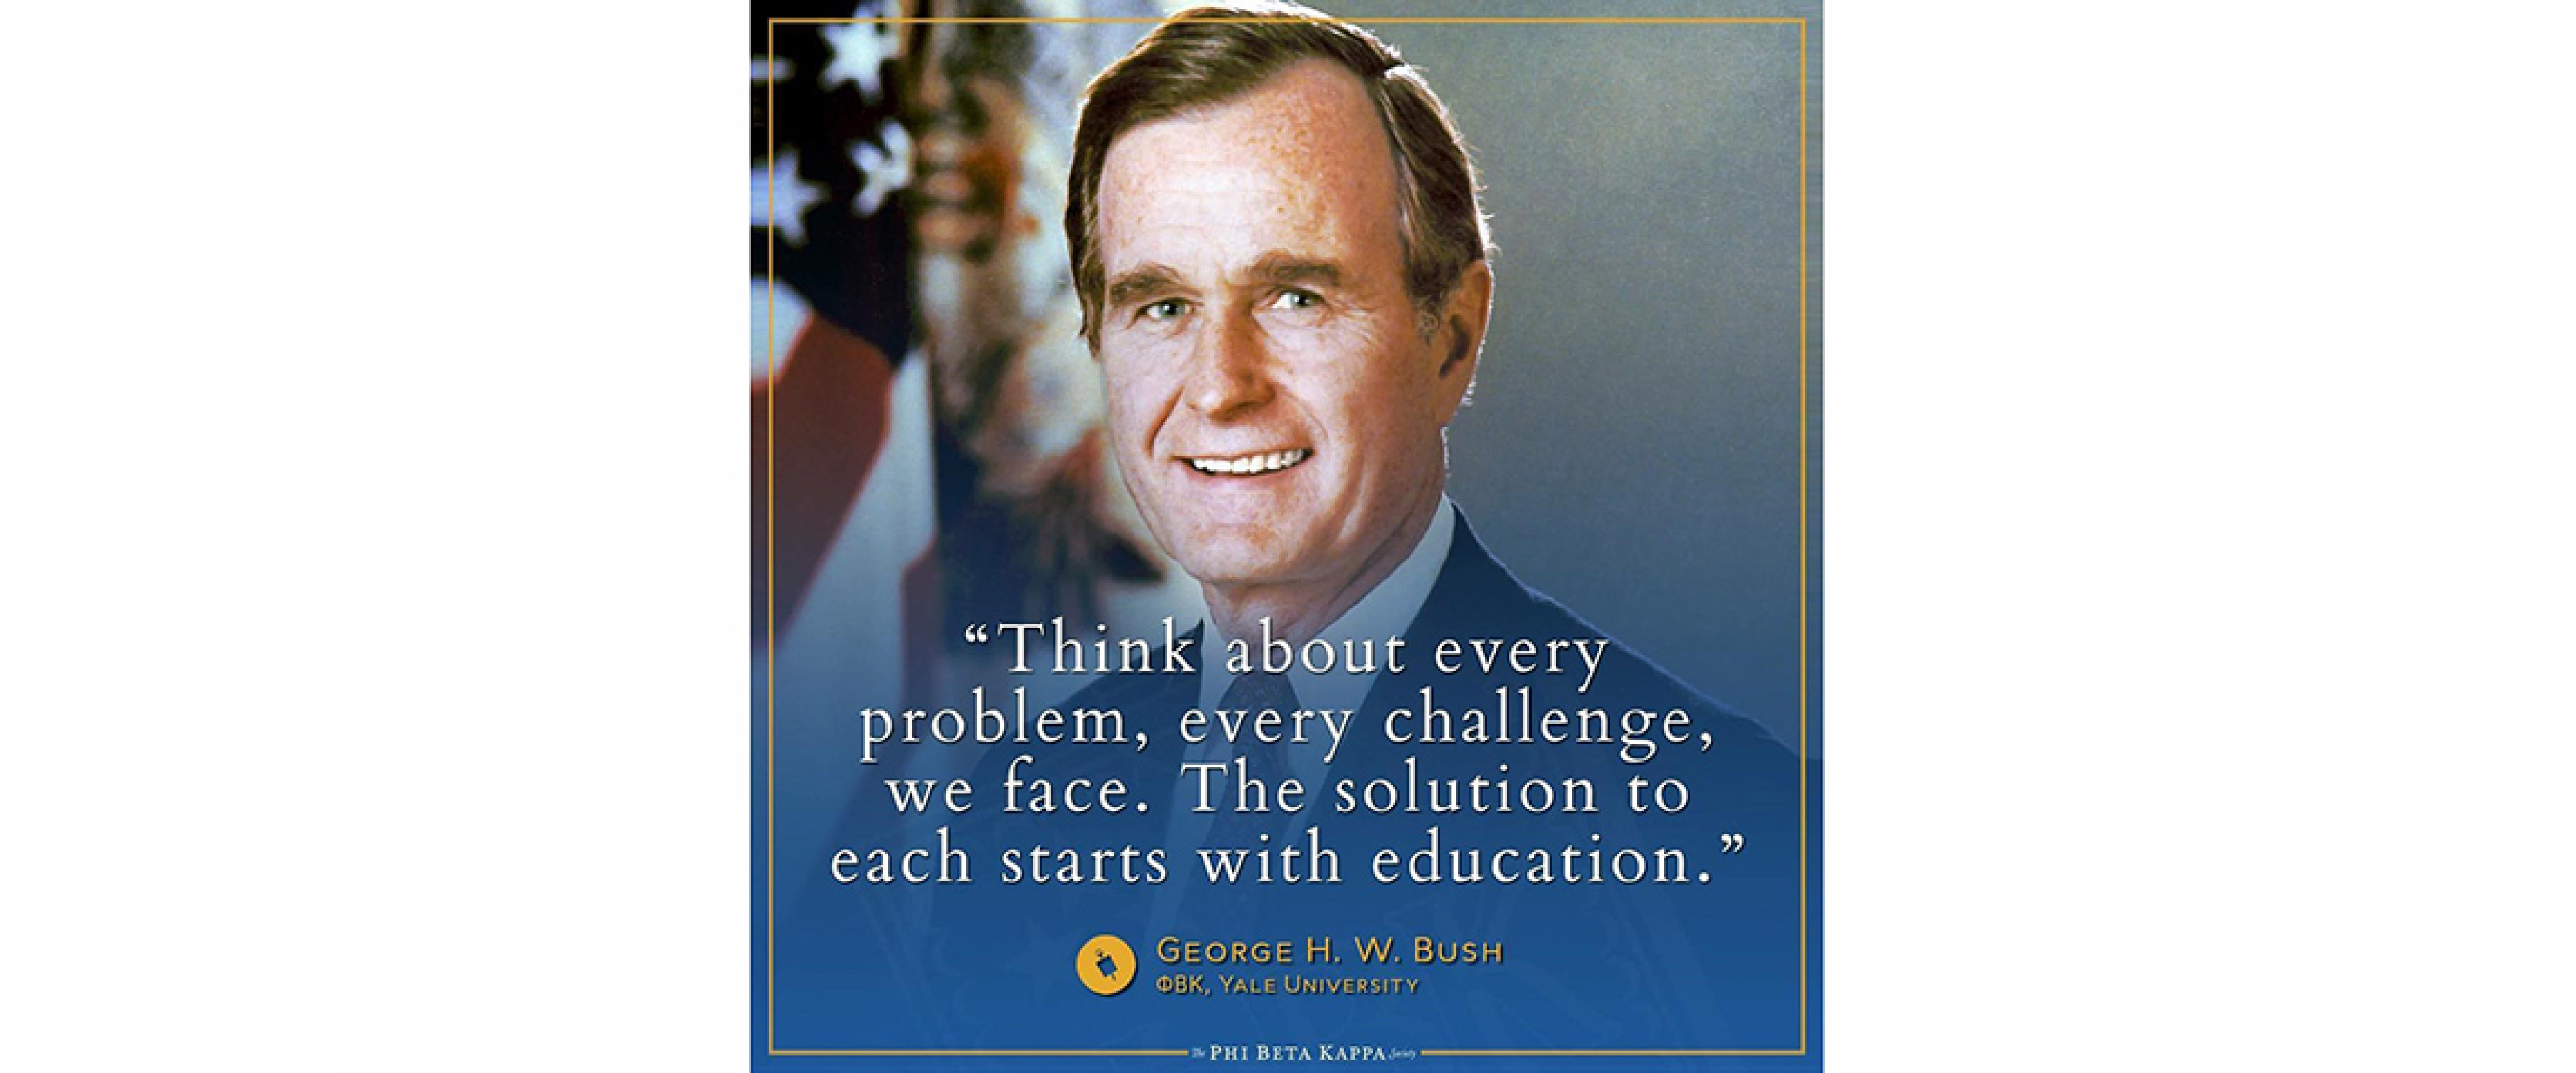 George H.W. Bush, PBK Yale - "Think about every problem, every challenge, we face. The solution to each starts with education"